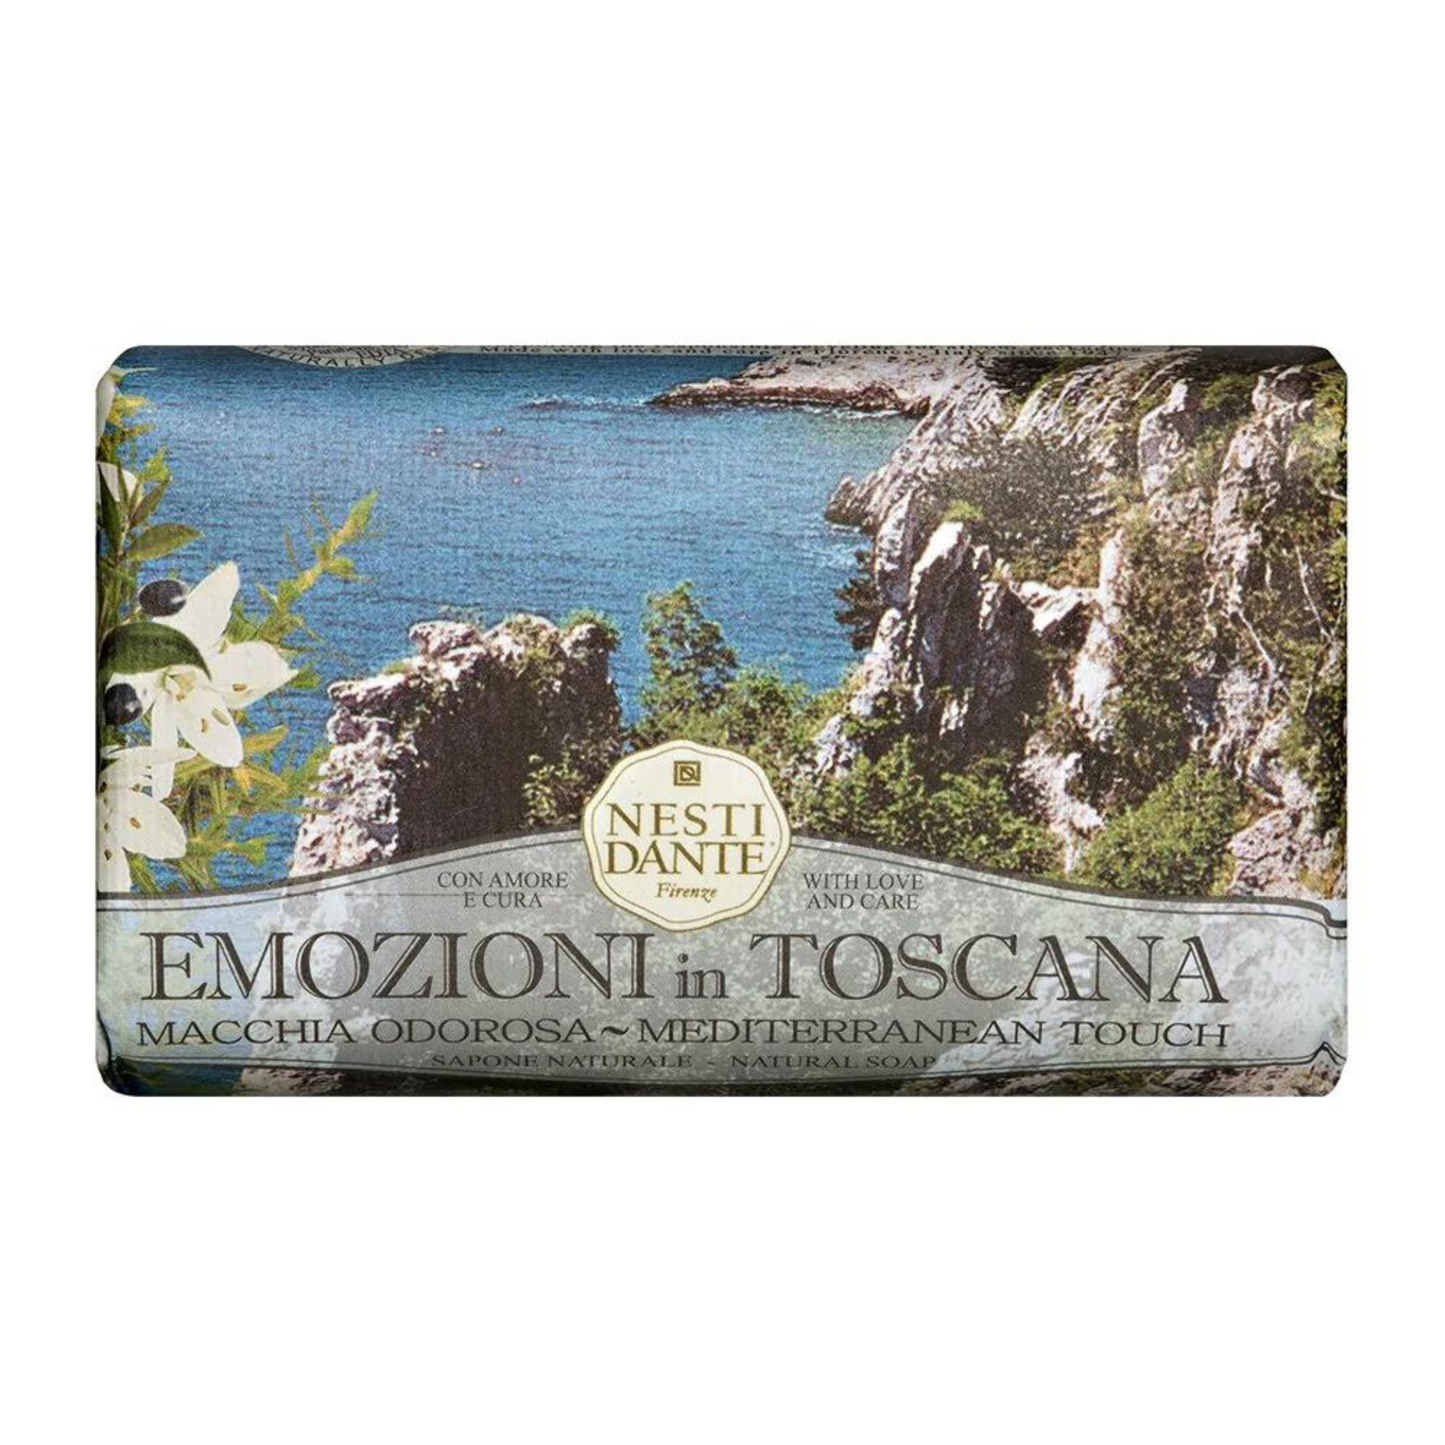 Primary Image of Mediterranean Touch Bar Soap